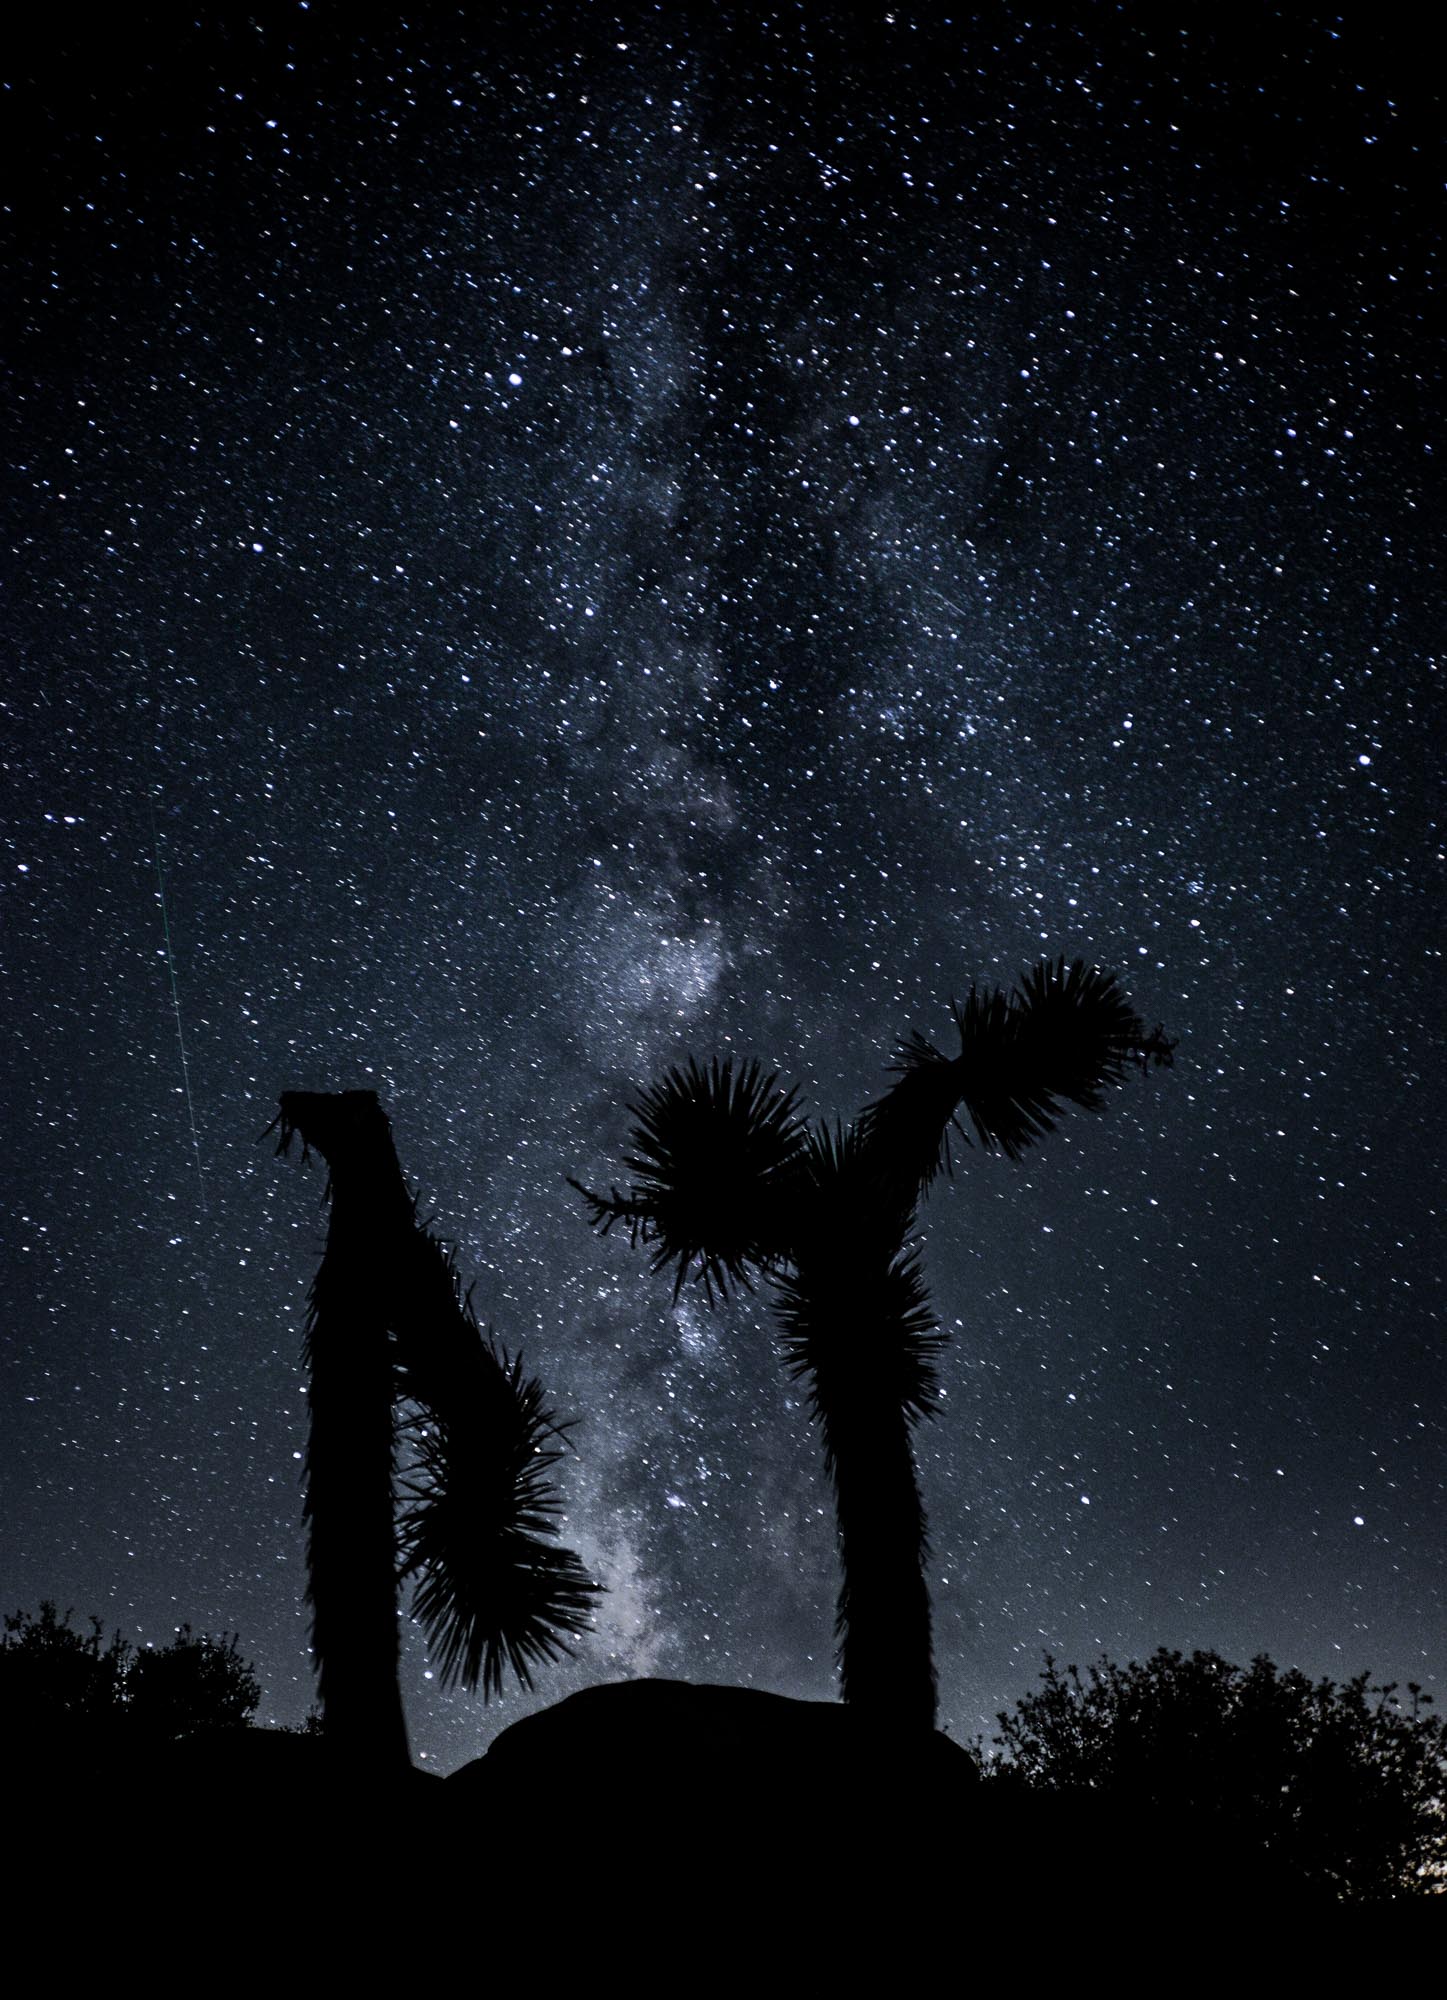 The silhouette of Two joshua trees sit in front of the milky way and some shooting stars